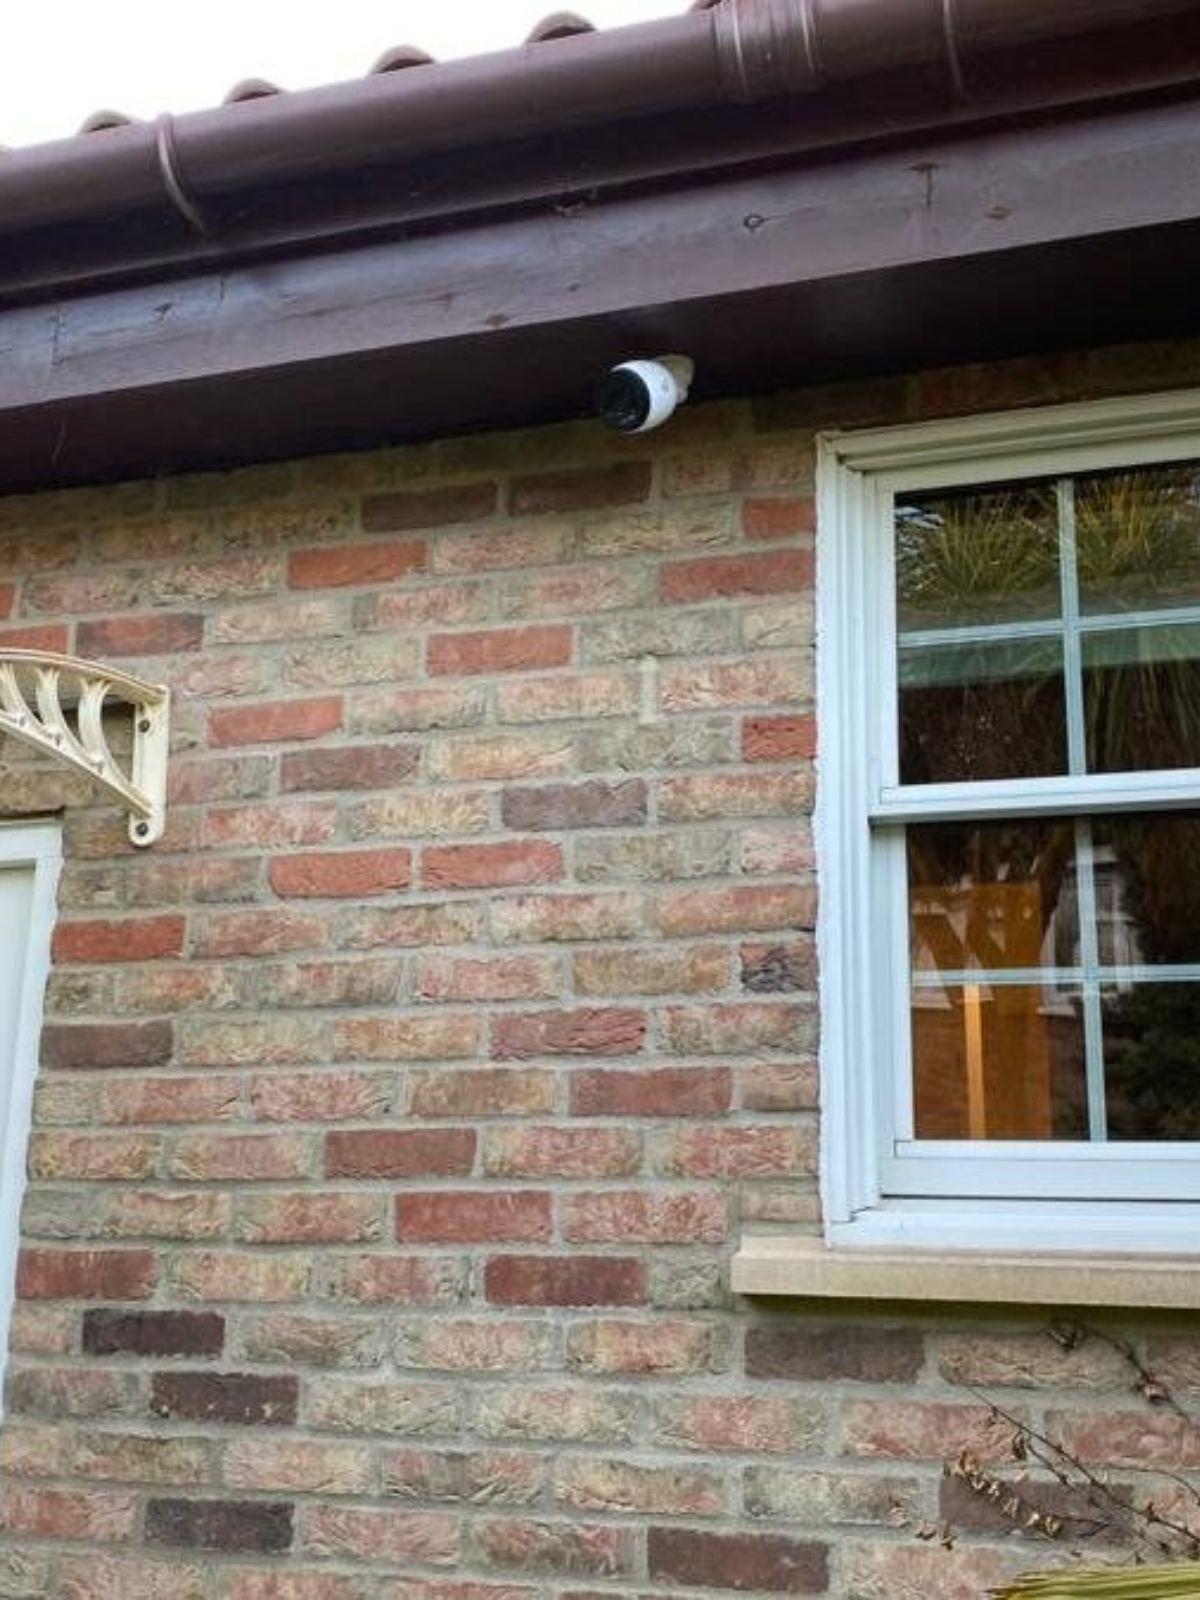 UniFi Security camera mounted on the side of a house pointing downwards